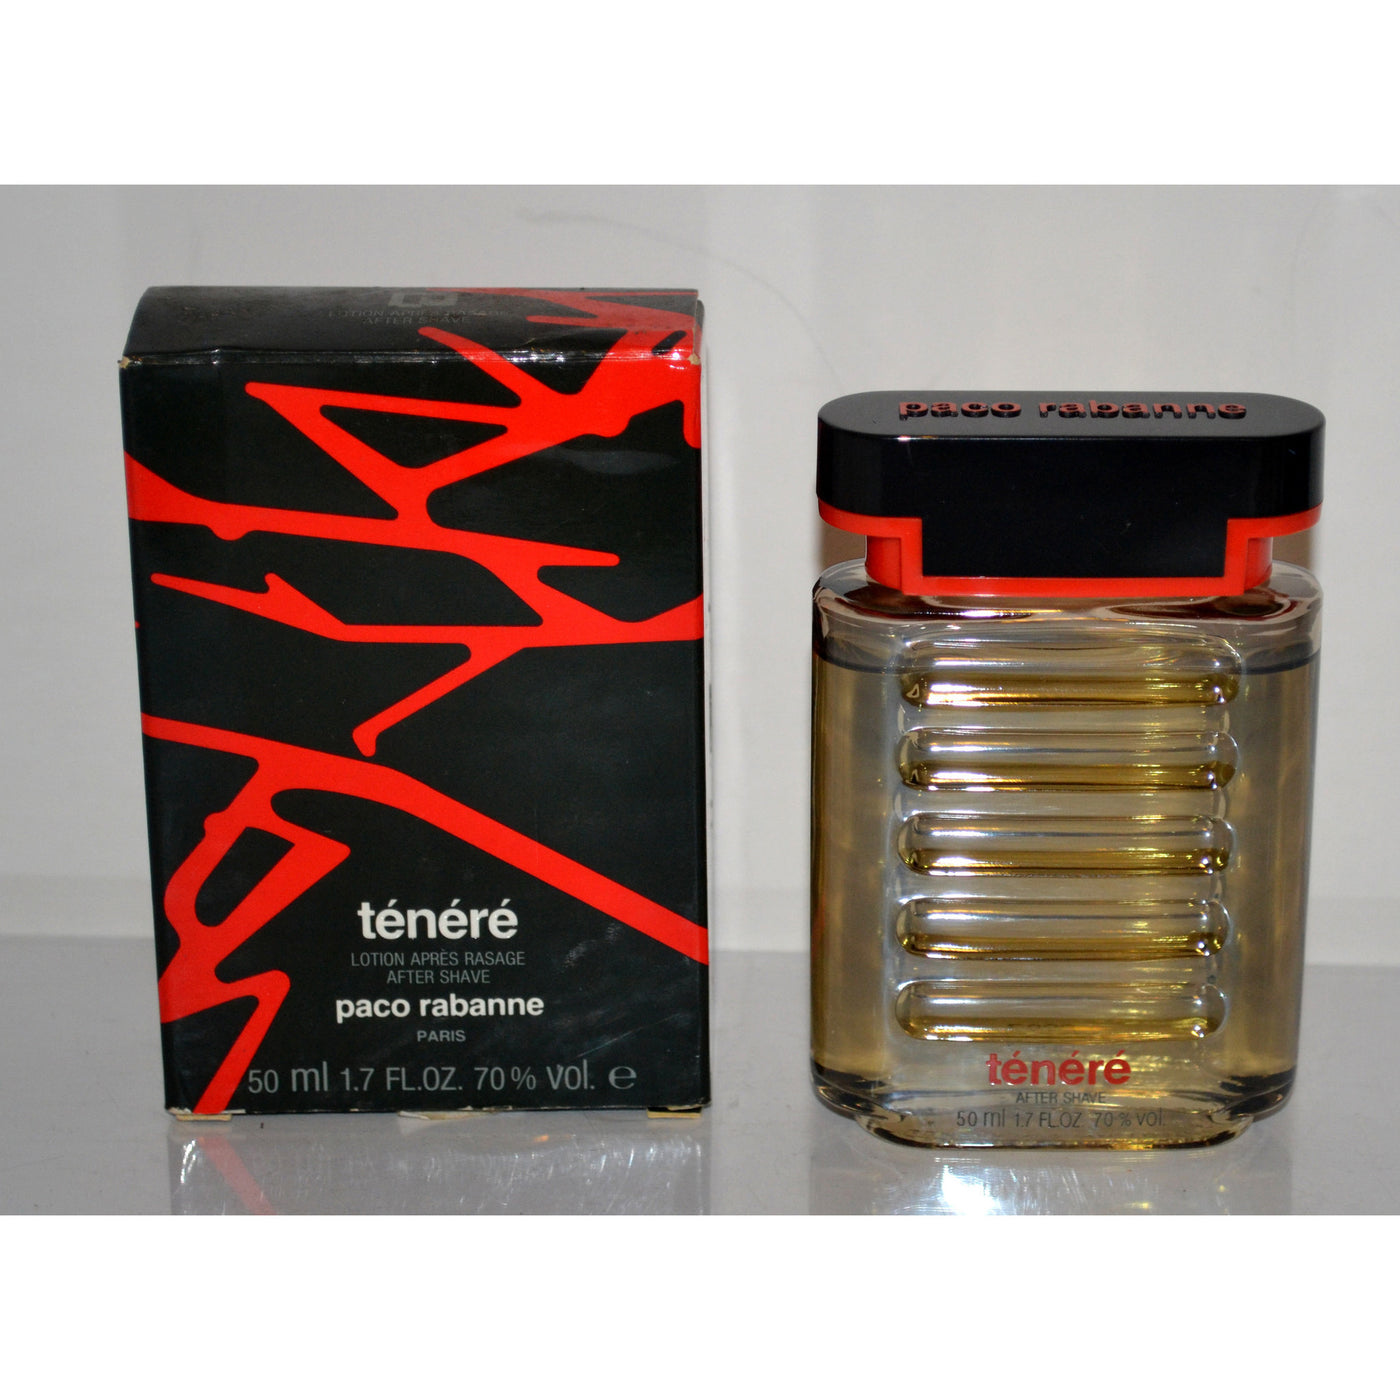 Vintage Tenere After Shave By Paco Rabanne 